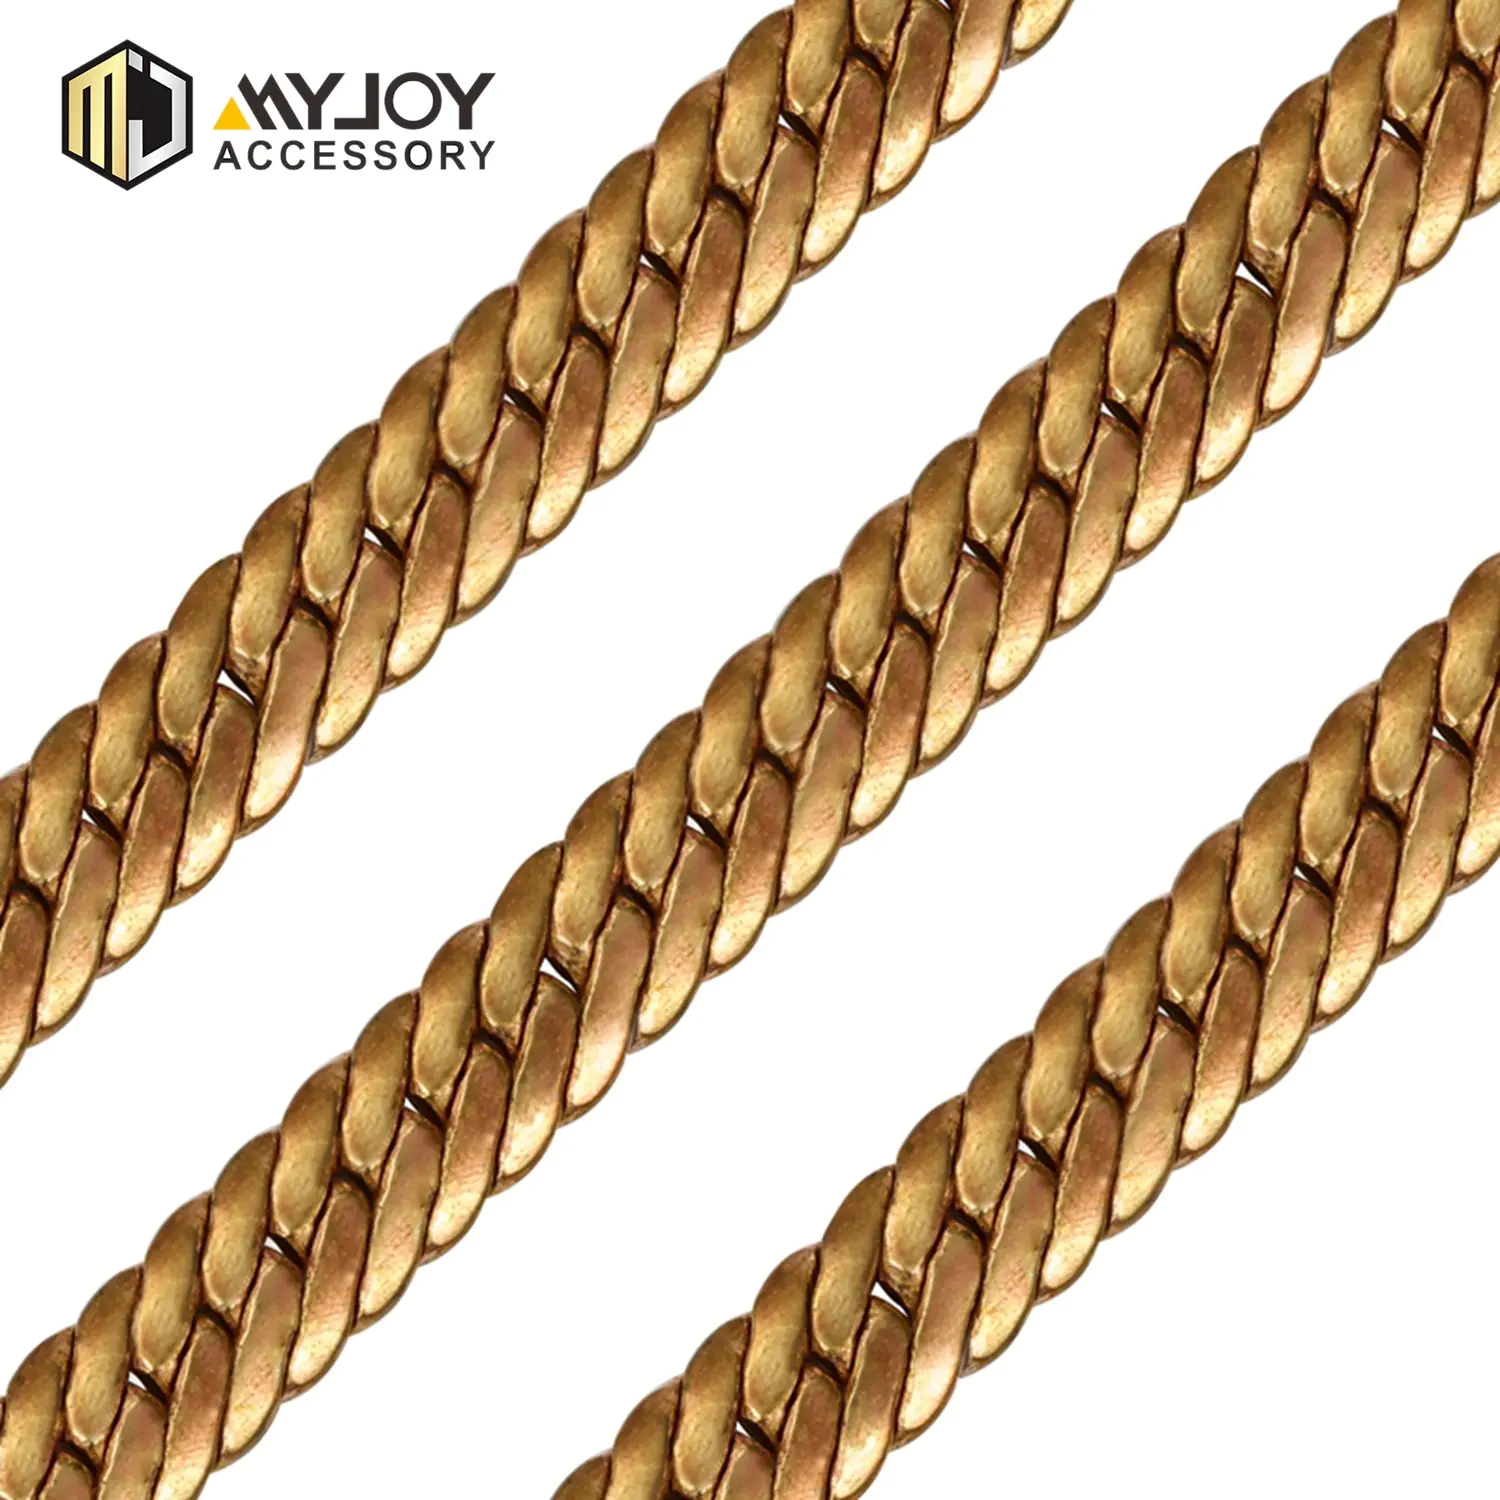 MYJOY alloy strap chain for business for bags